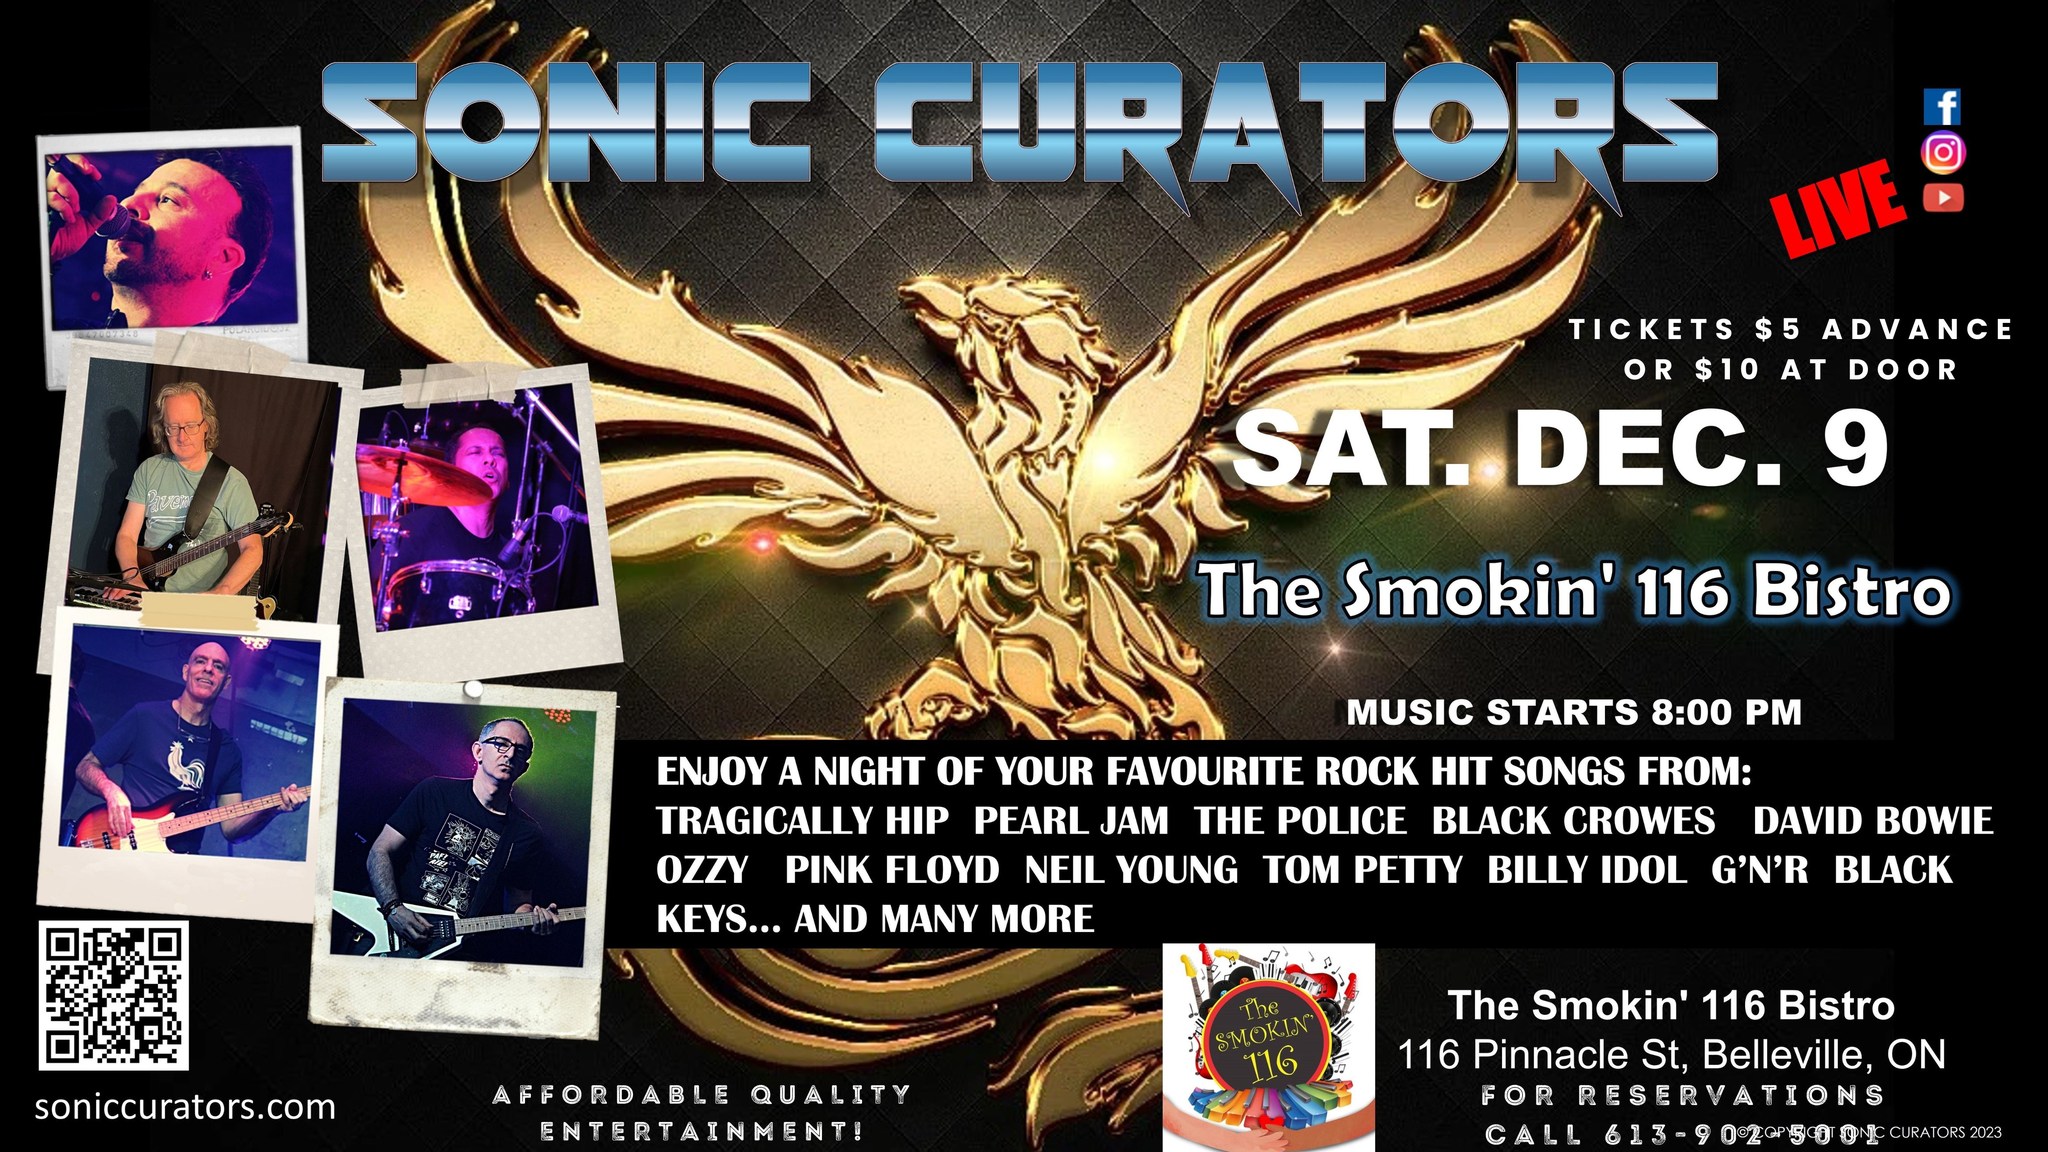 poster of the event with band member photos, a golden eagle and details of the event.